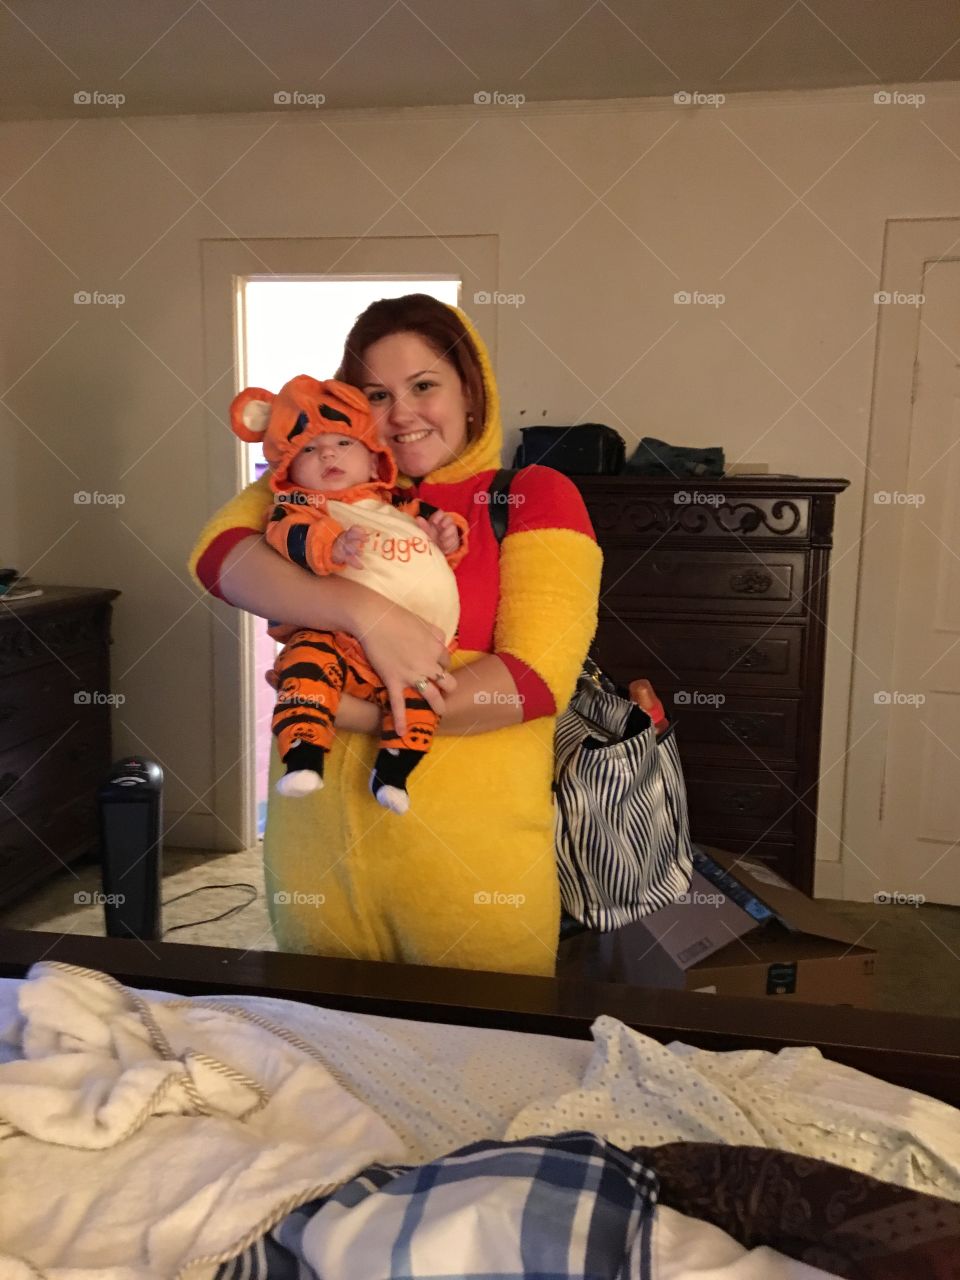 My grandson and my daughter dressed up for Halloween.My daughter's Winnie the Pooh.My grandson is Tigger! Very adorable Mother and Son!